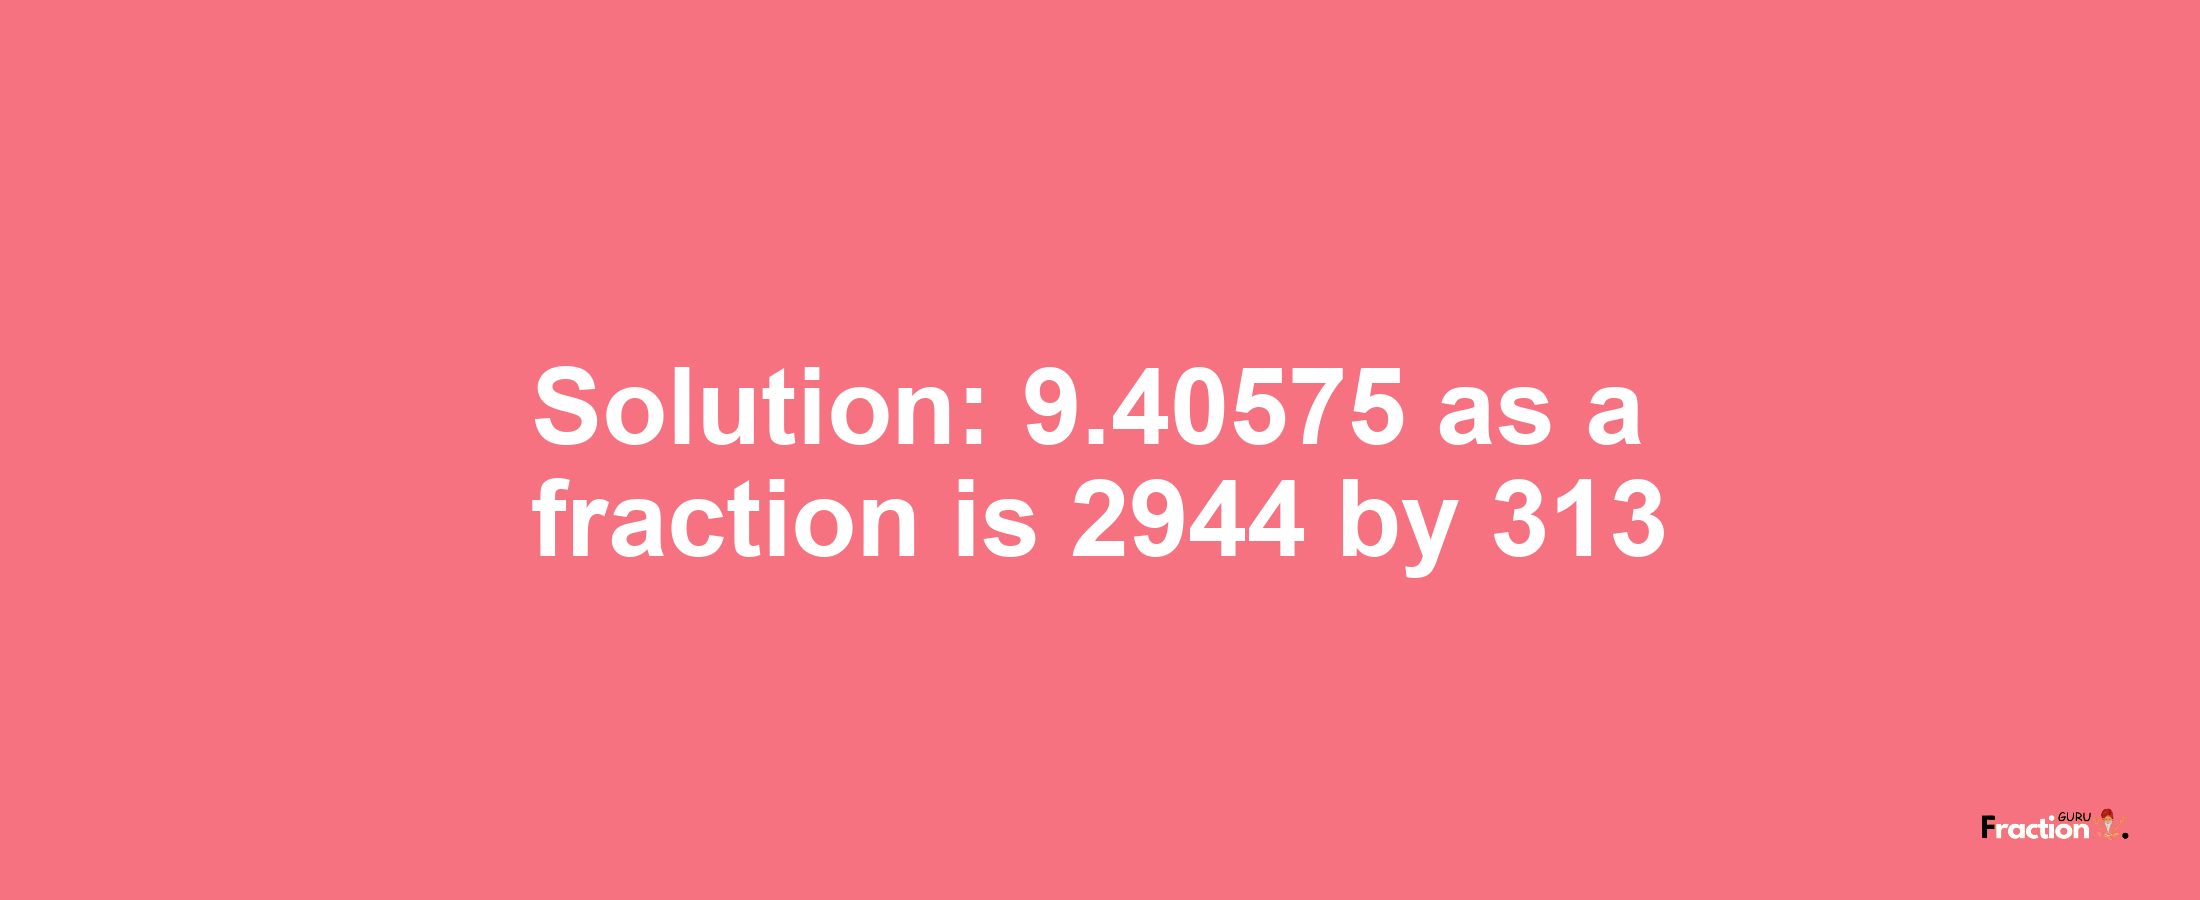 Solution:9.40575 as a fraction is 2944/313